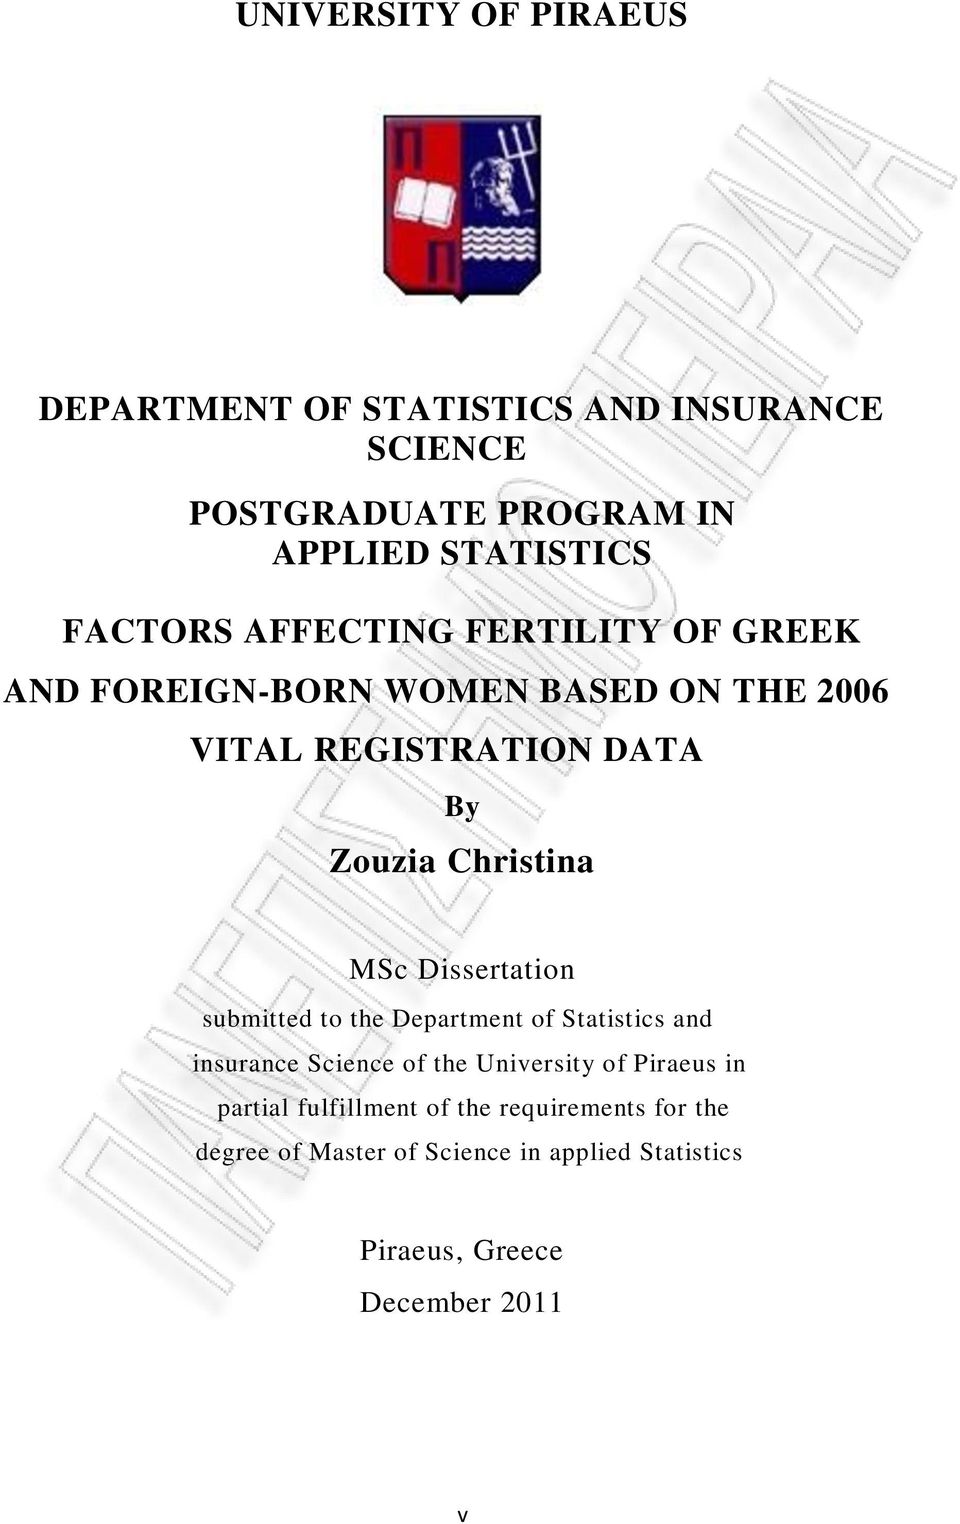 Christina MSc Dissertation submitted to the Department of Statistics and insurance Science of the University of